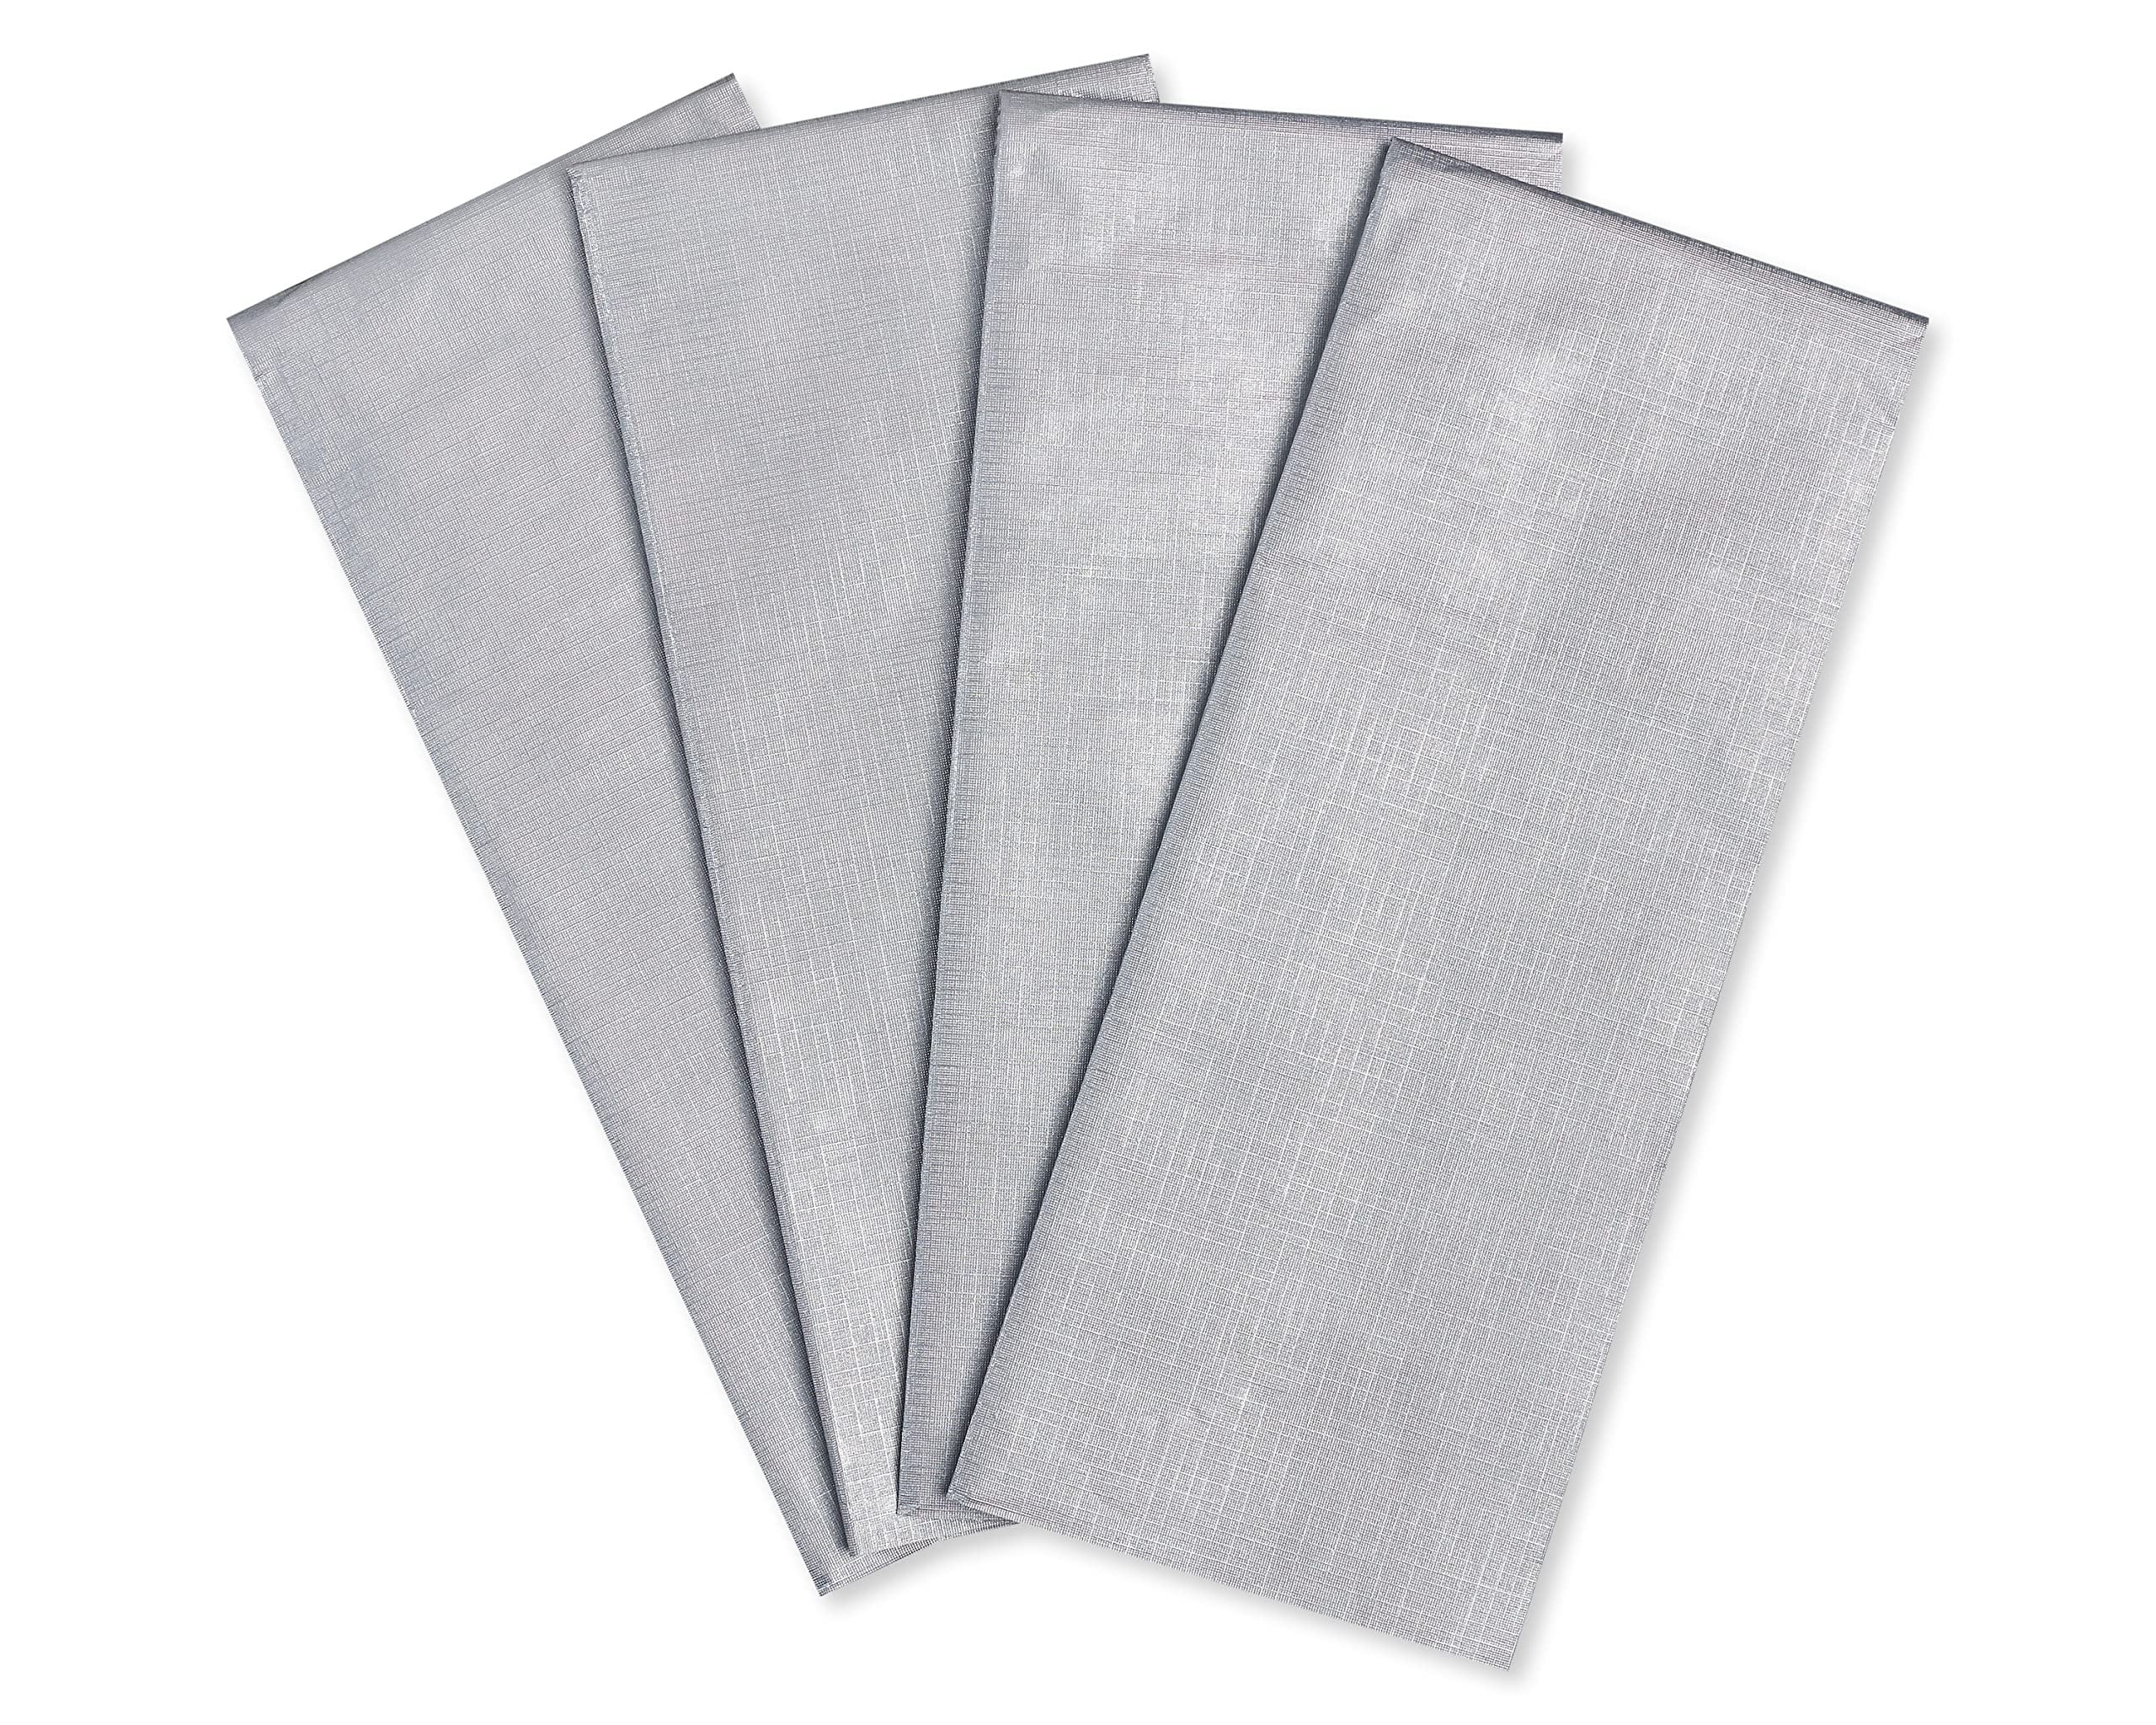 Metallic Silver Tissue Paper for Gifts, Decorations, Crafts, DIY and More  4-sheets 